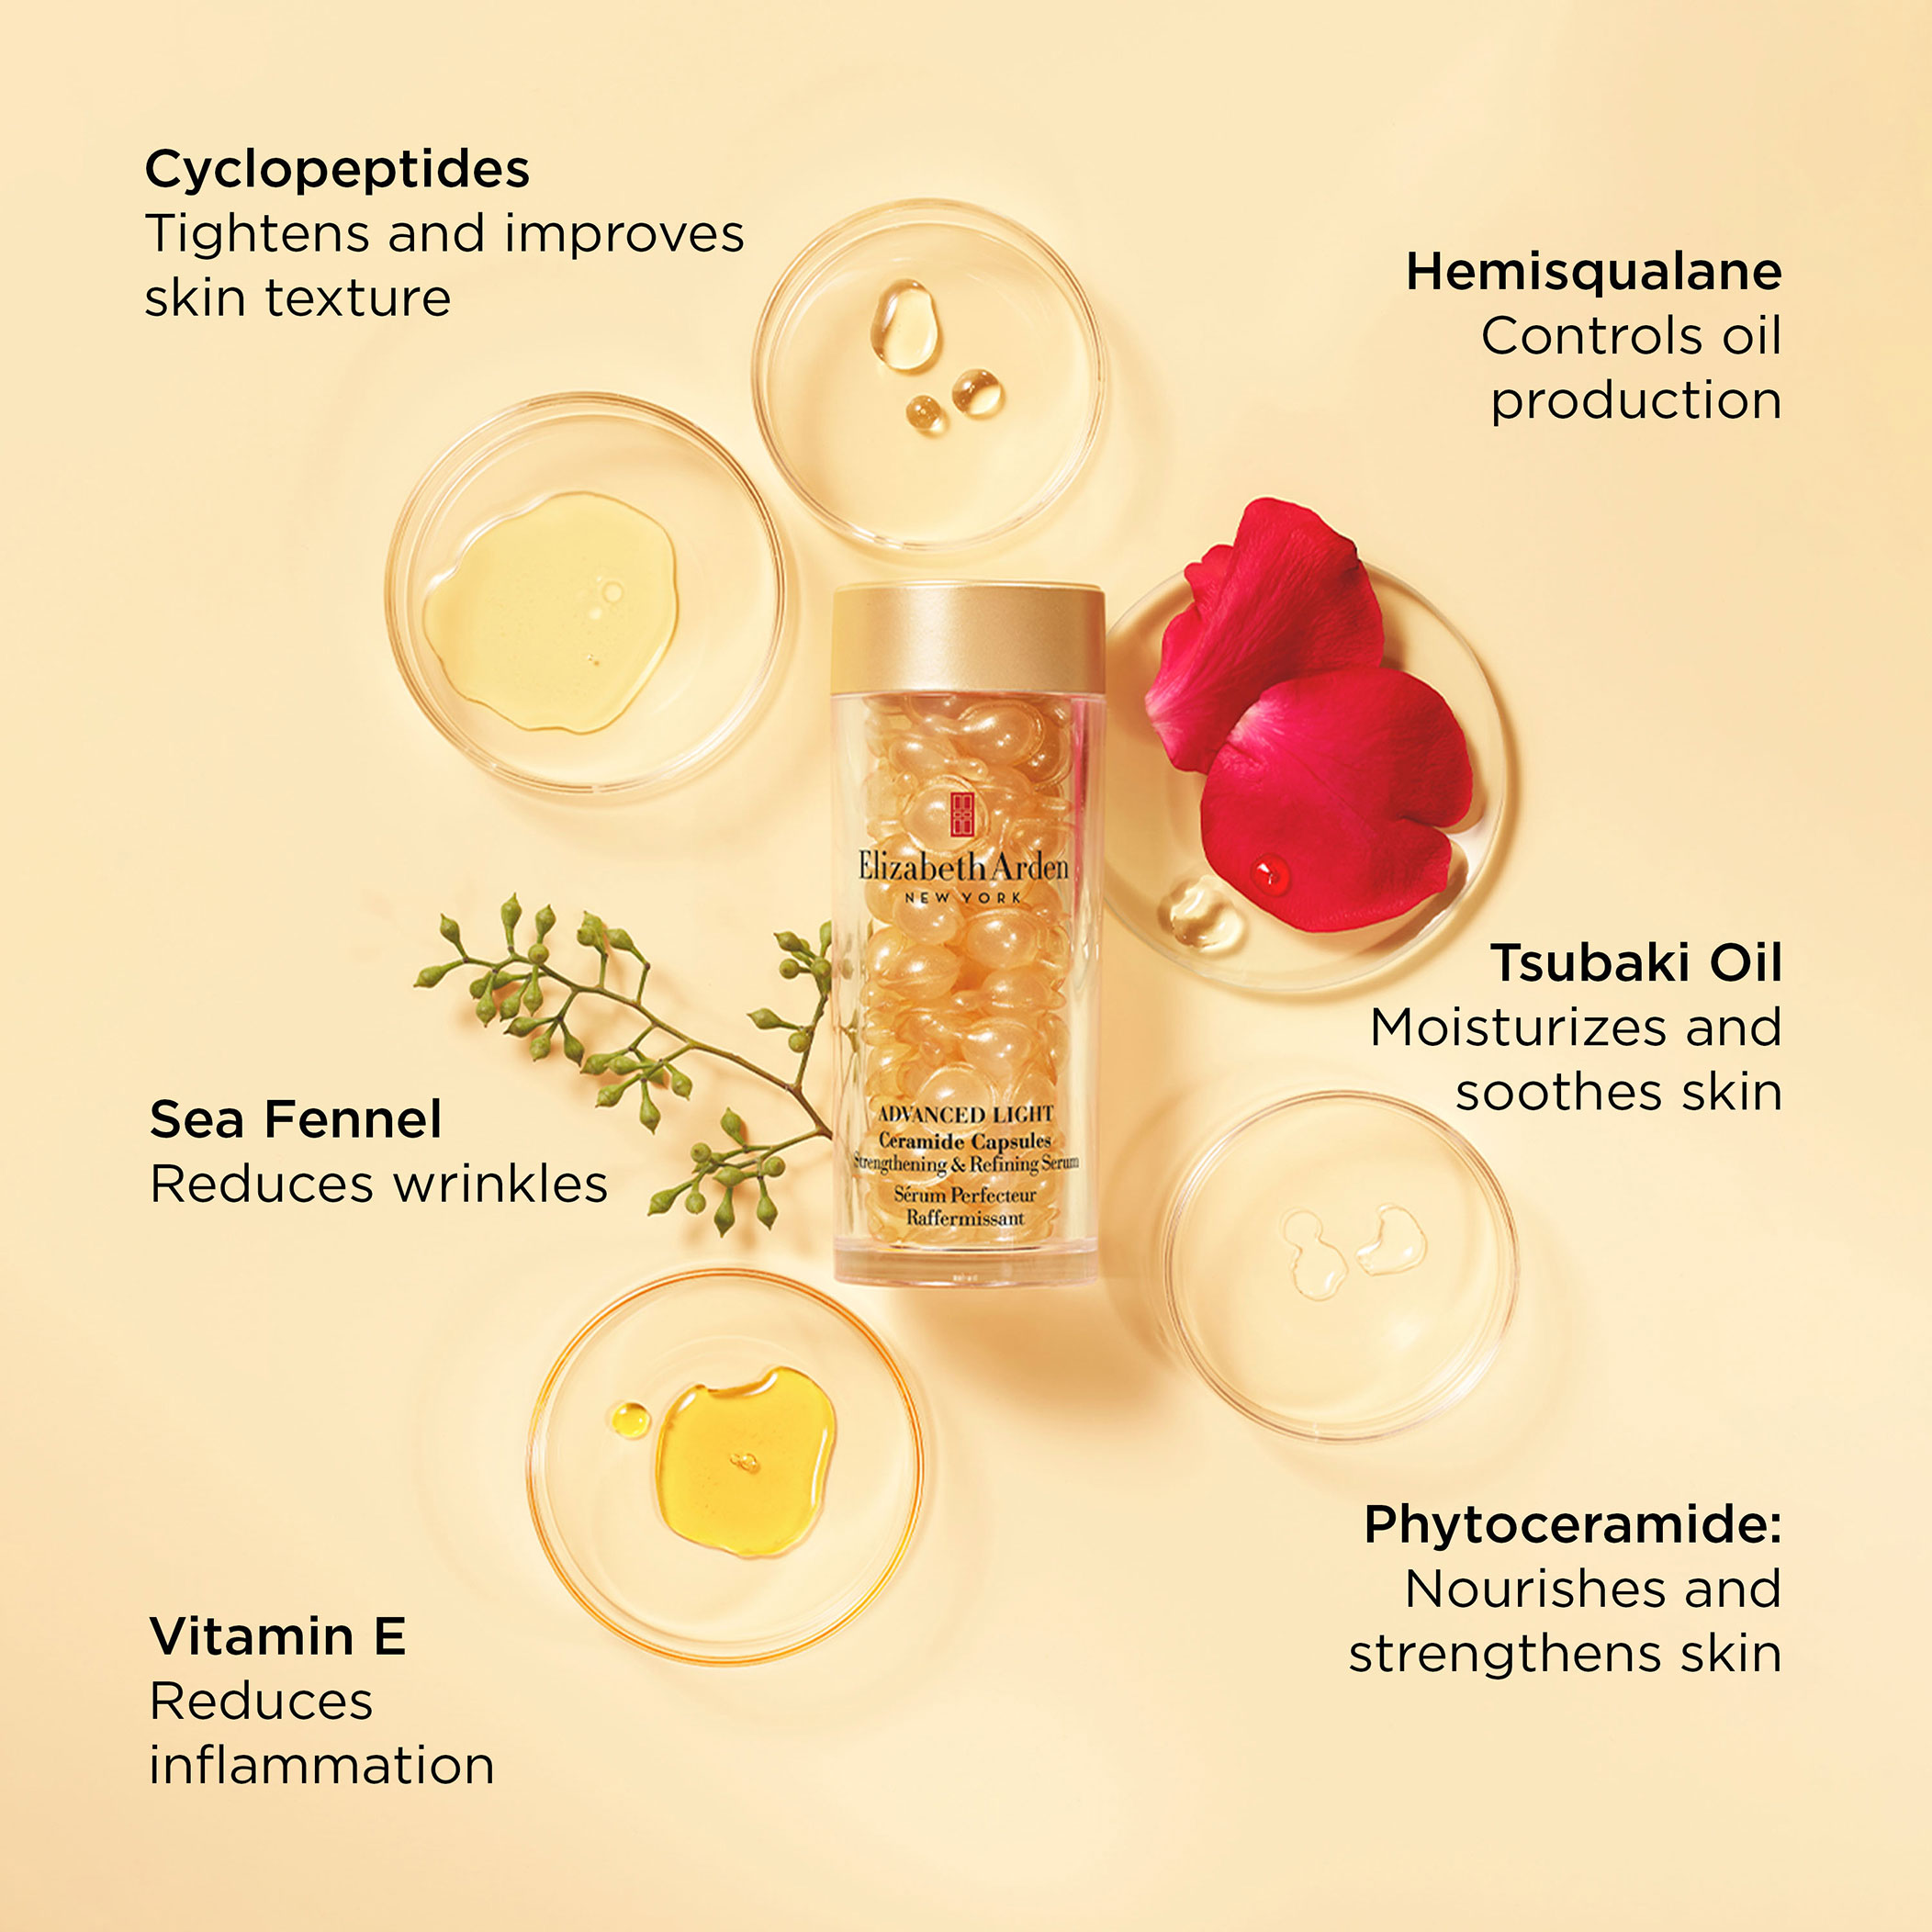 Ingredients- Cyclopeptides-tightens and improves skin texture, Hemisqualane- controls oil production, sea fennel-reduces wrinkles, Tsubaki oil-moisturizes and soothes skin, vitamin e- reduces inflammation, phytoceramide-nourishes and strengthens skin